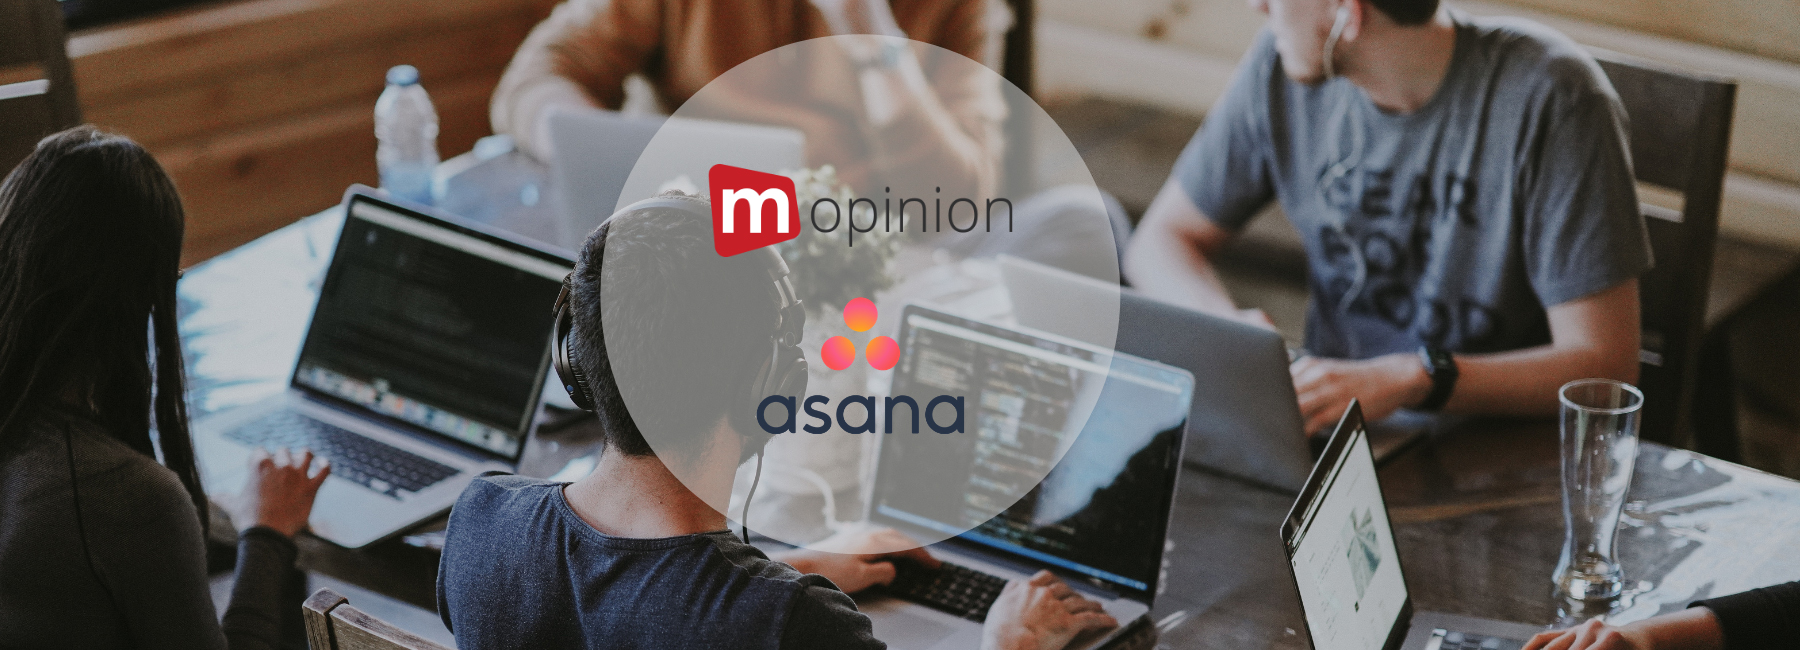 Mopinion launches new integration with Asana